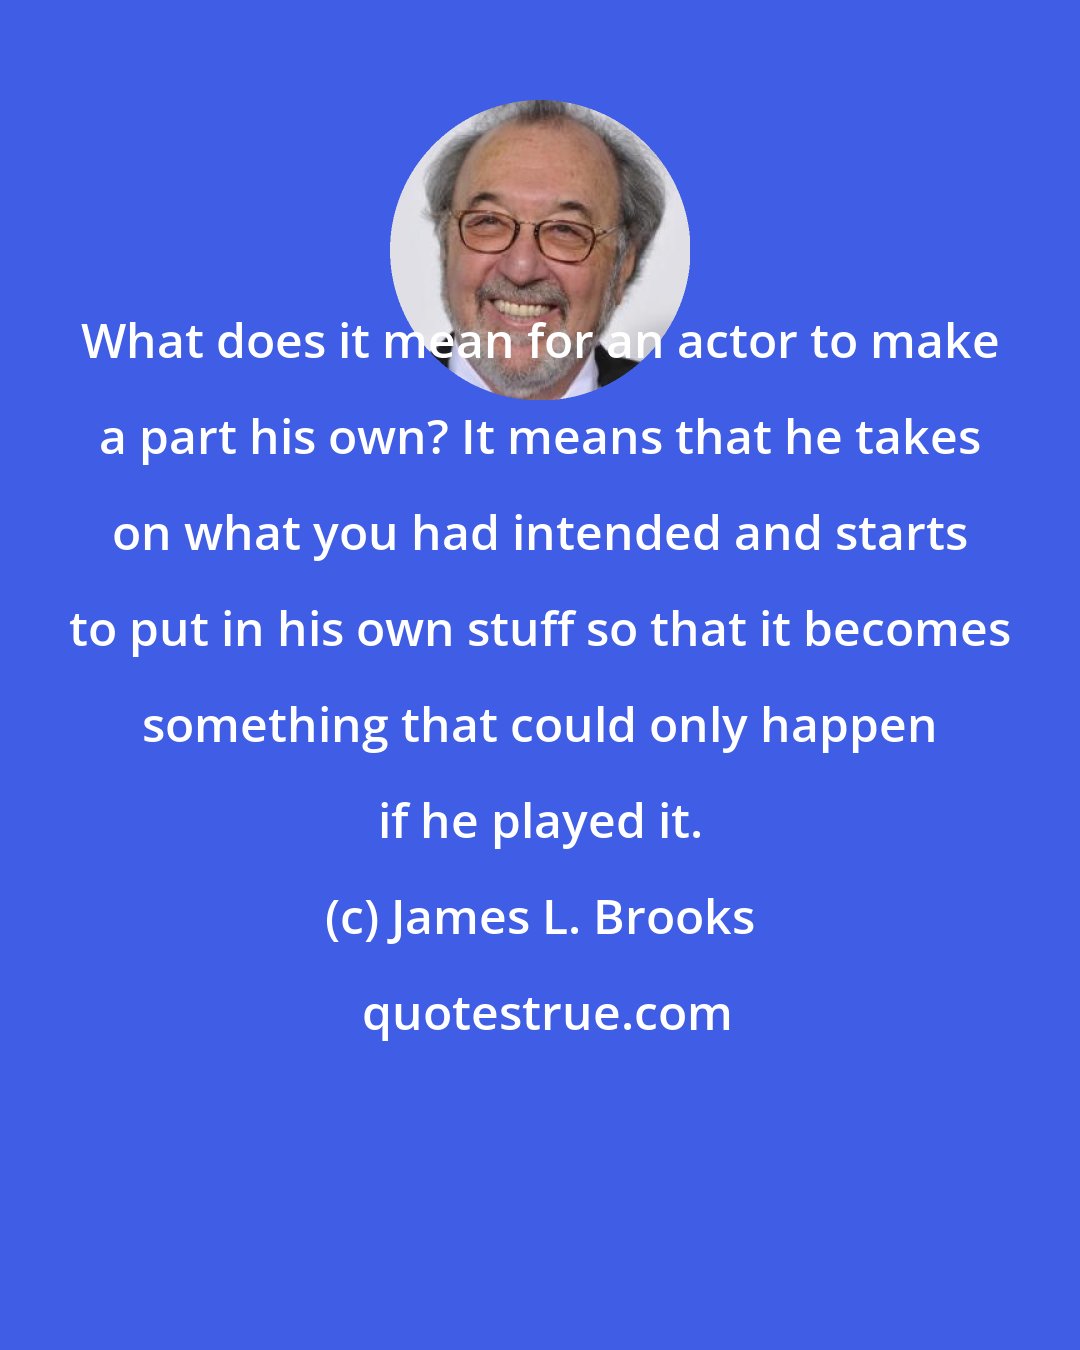 James L. Brooks: What does it mean for an actor to make a part his own? It means that he takes on what you had intended and starts to put in his own stuff so that it becomes something that could only happen if he played it.